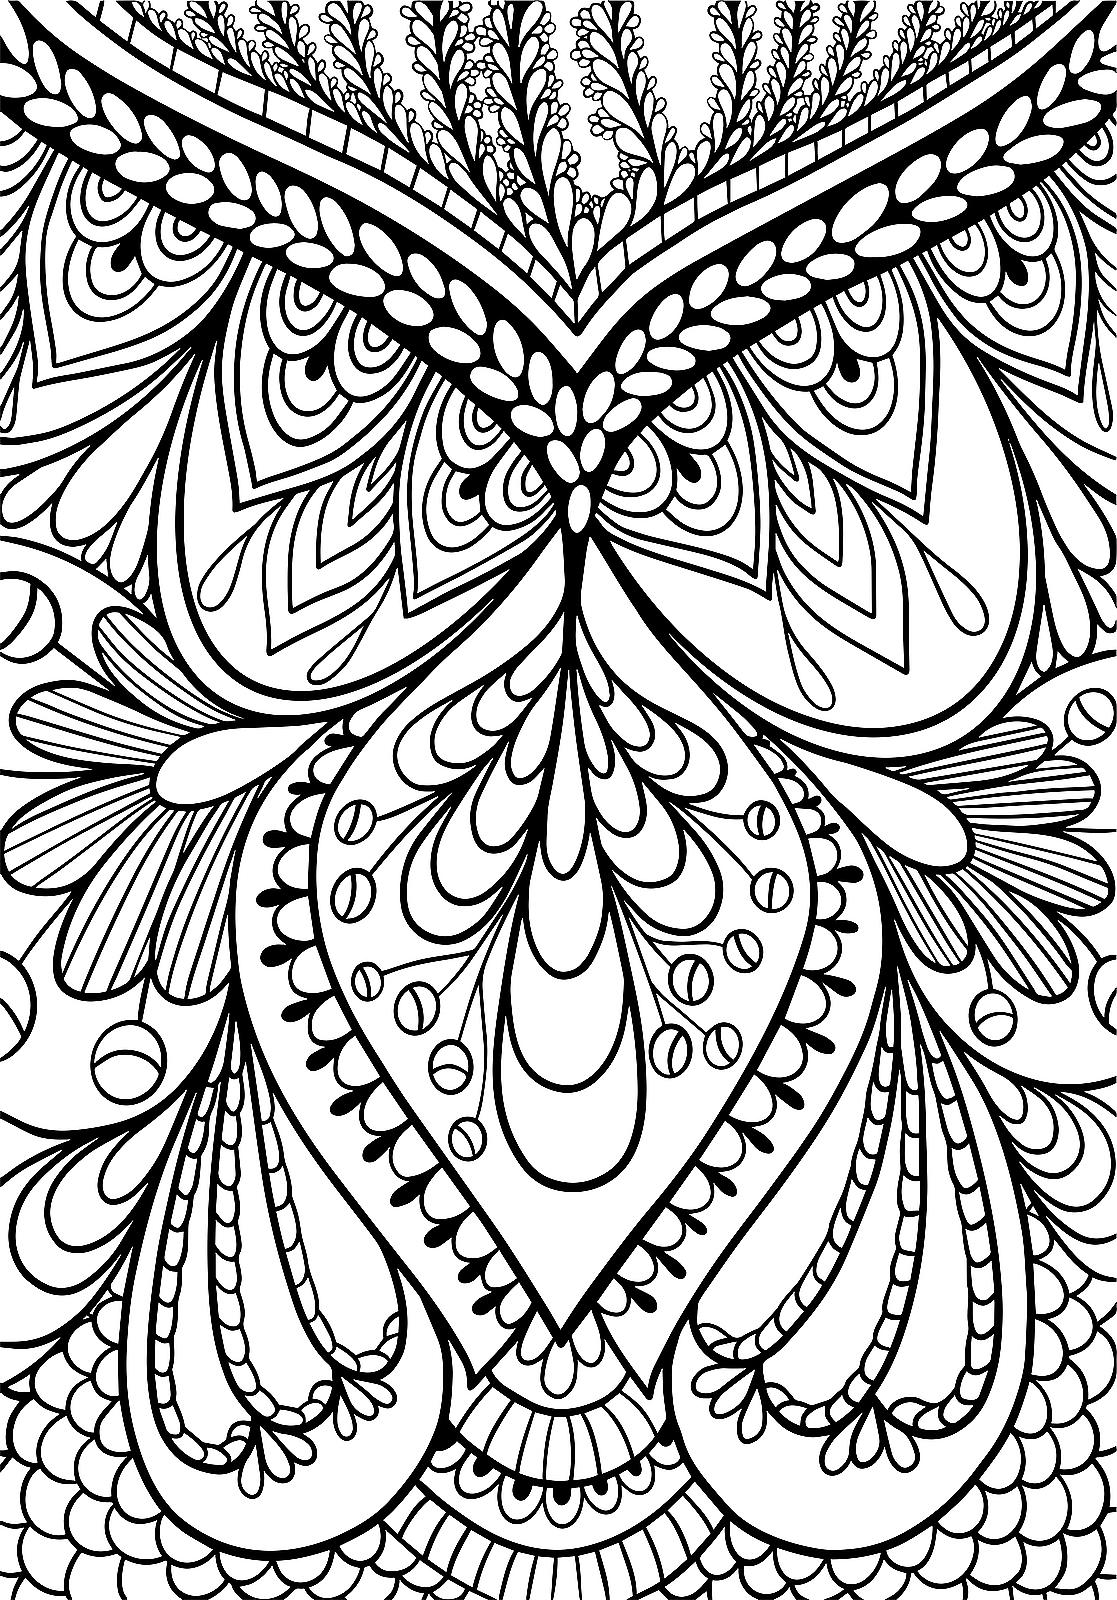 Fun adult coloring pages the ultimate free printable adult coloring book to chill out relax printables mom